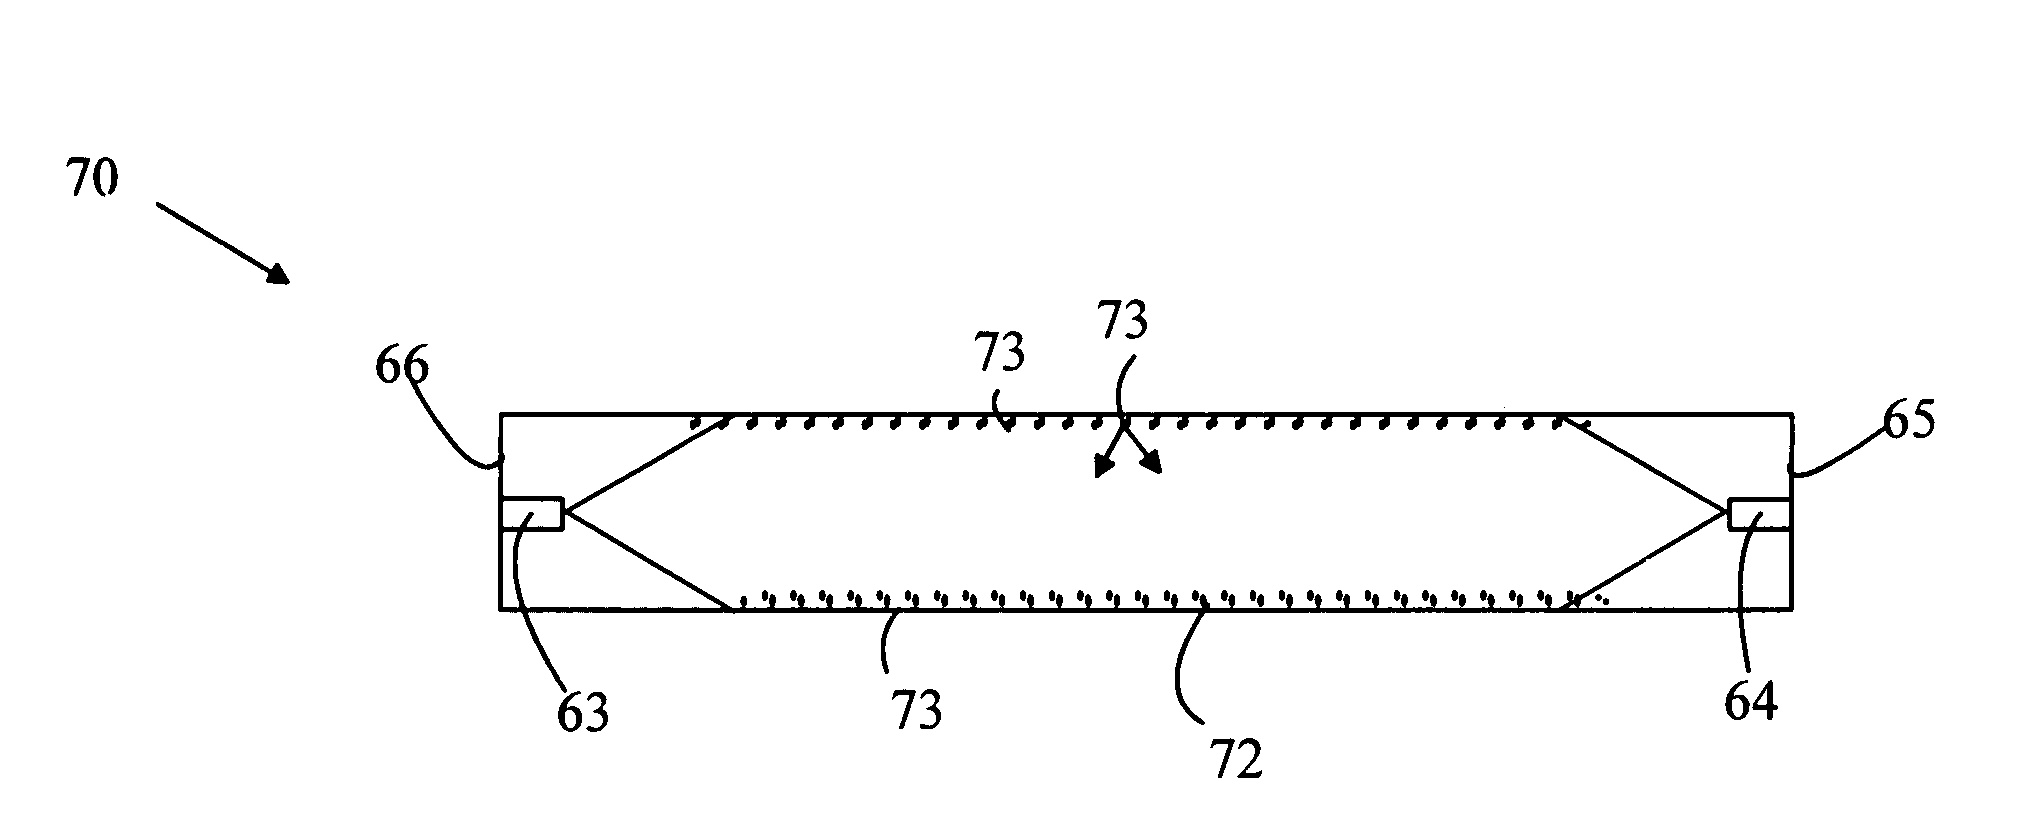 Semiconductor light source configured as a light tube